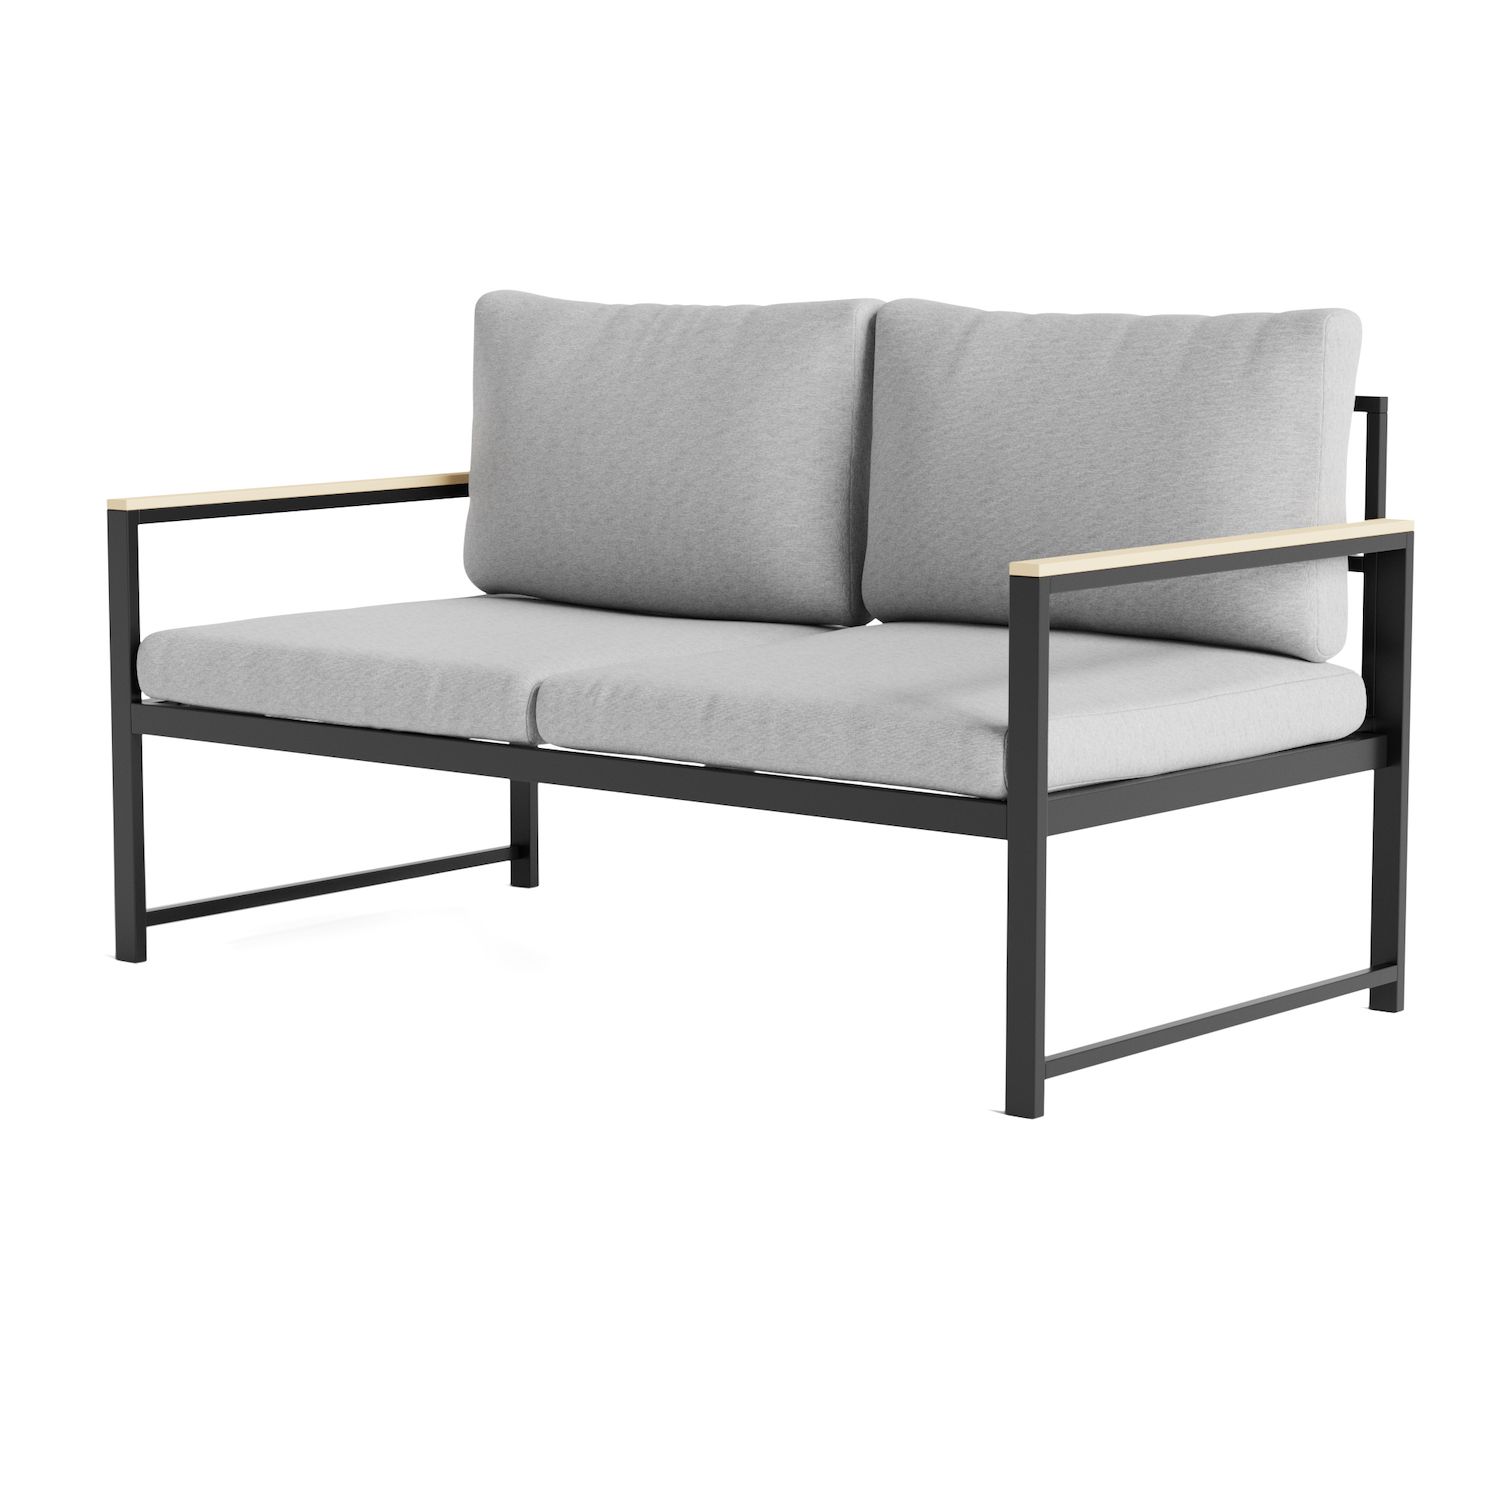 Image for Dream Collection Lucid Outdoor Patio Loveseat at Kohl's.